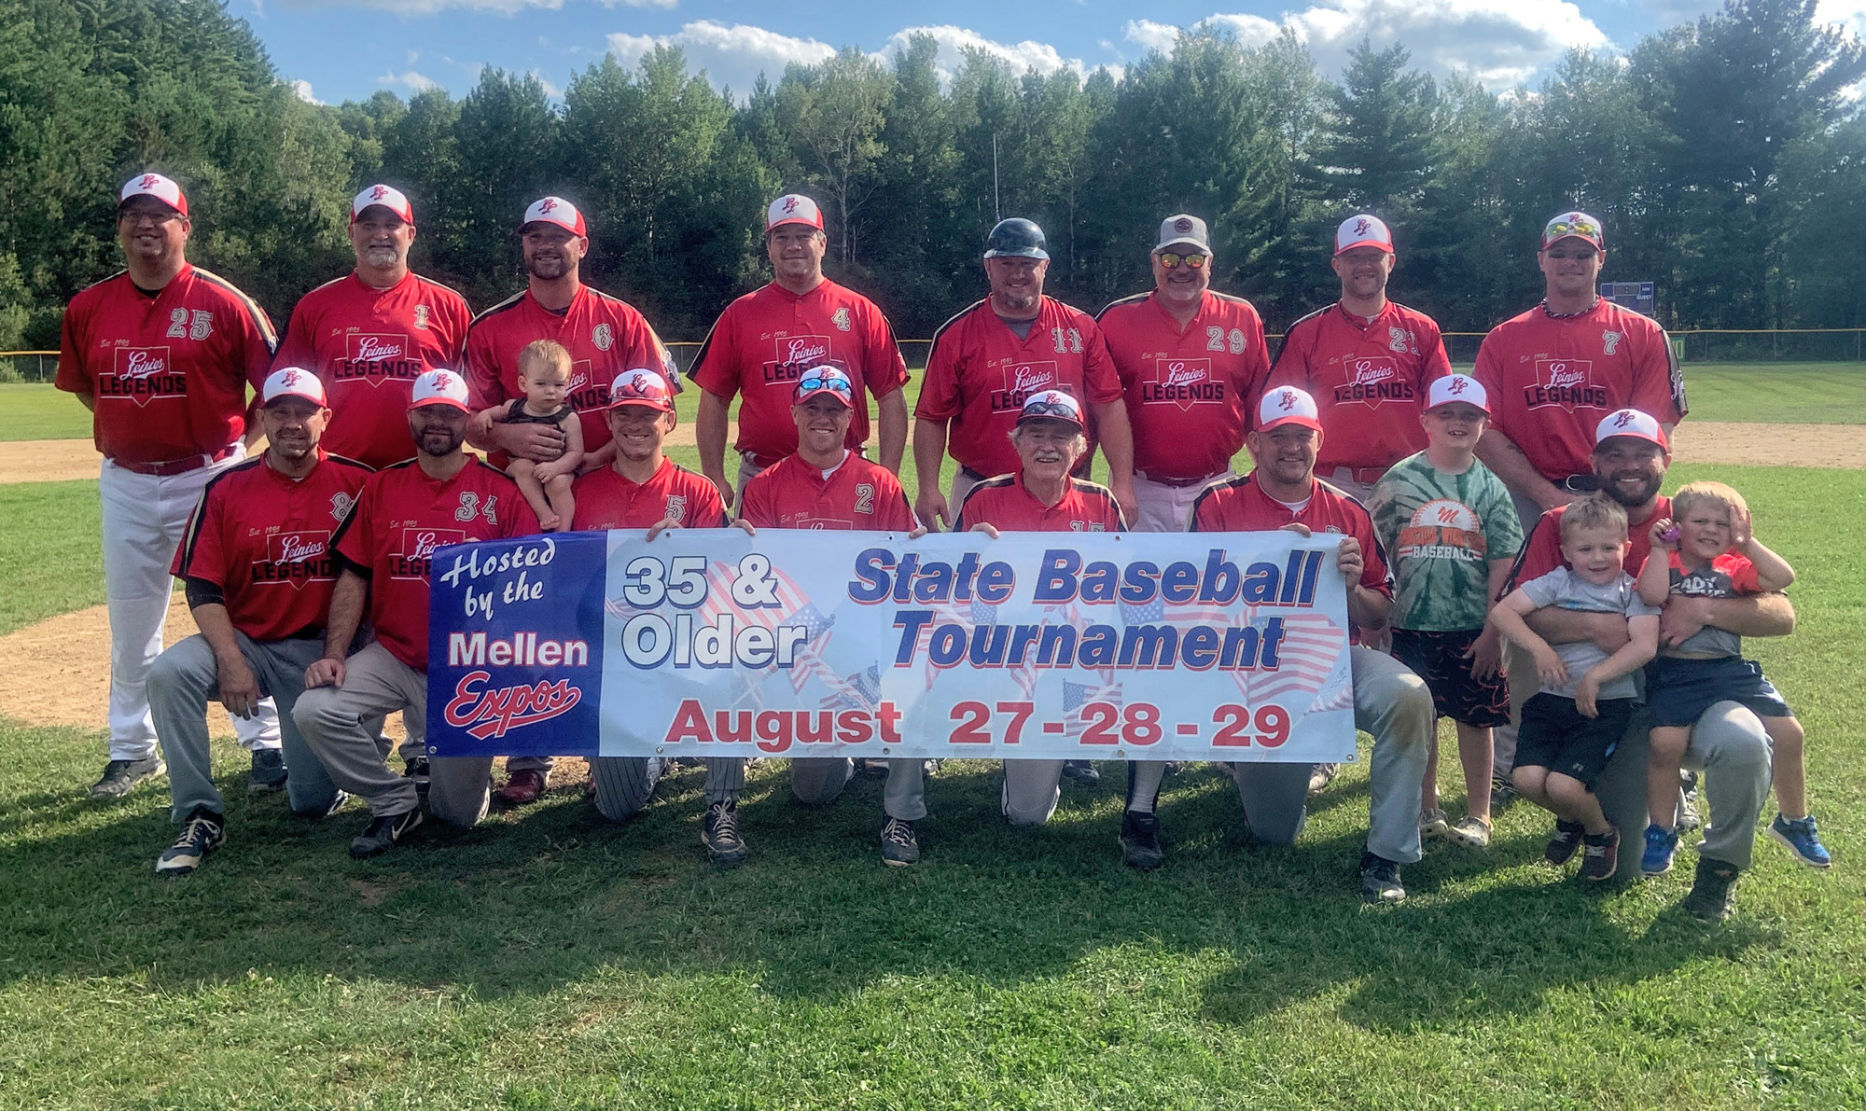 Amateur Baseball Leinies Legends over 35 team wins first-ever state championship